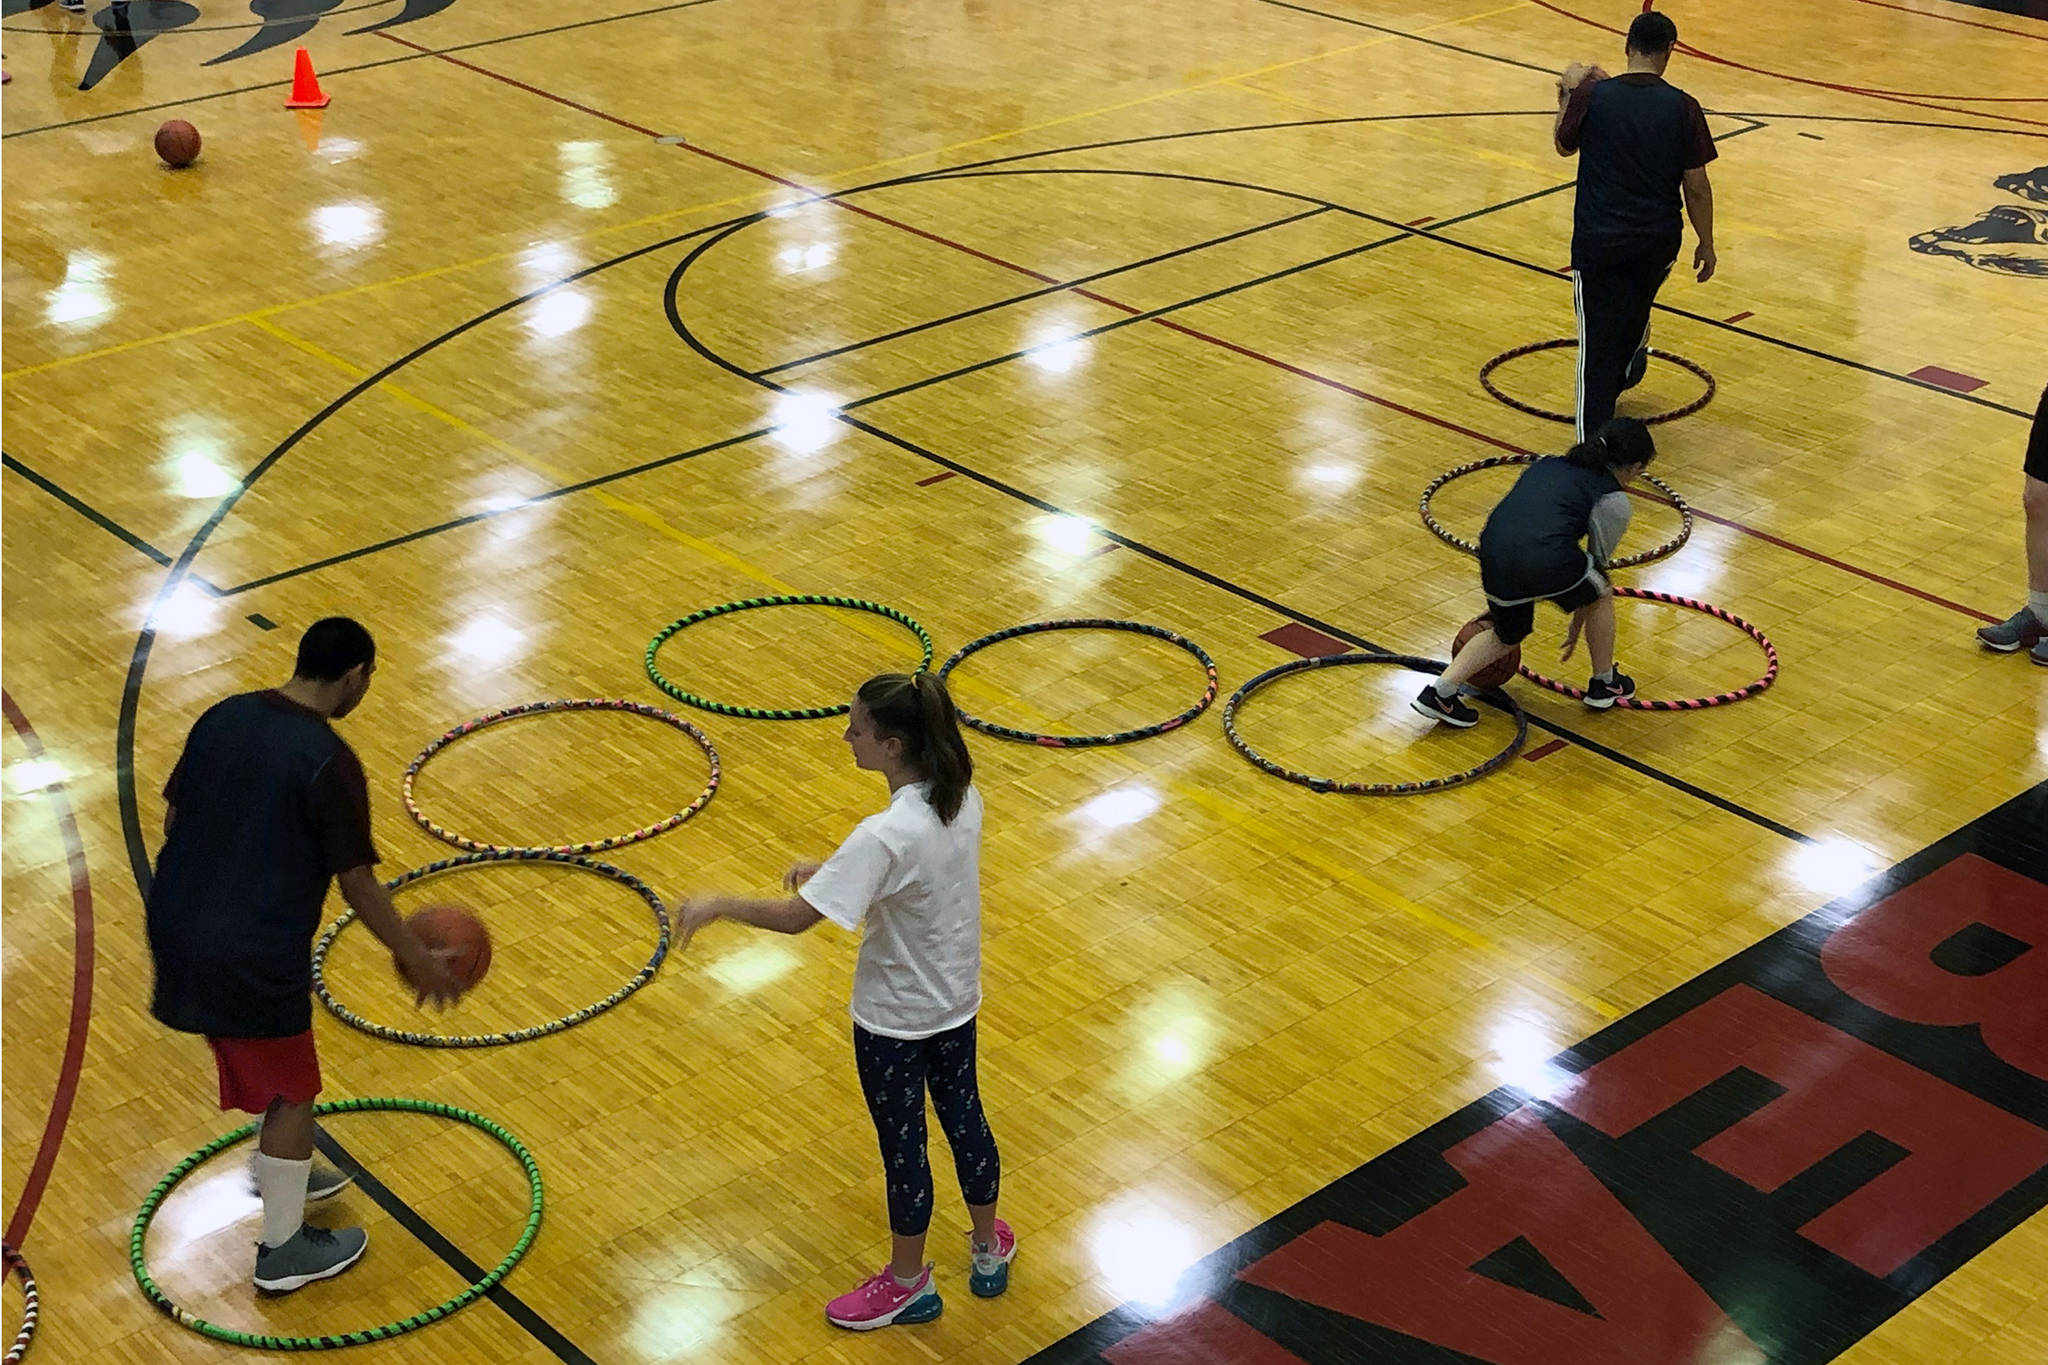 Campers dribble through hula hoops at the I Did, You Can! basketball camp at Juneau-Douglas High School: Yadaat.at Kale on Sunday, Sept. 29, 2019. (Courtesy Photo | Janette Gagnon)